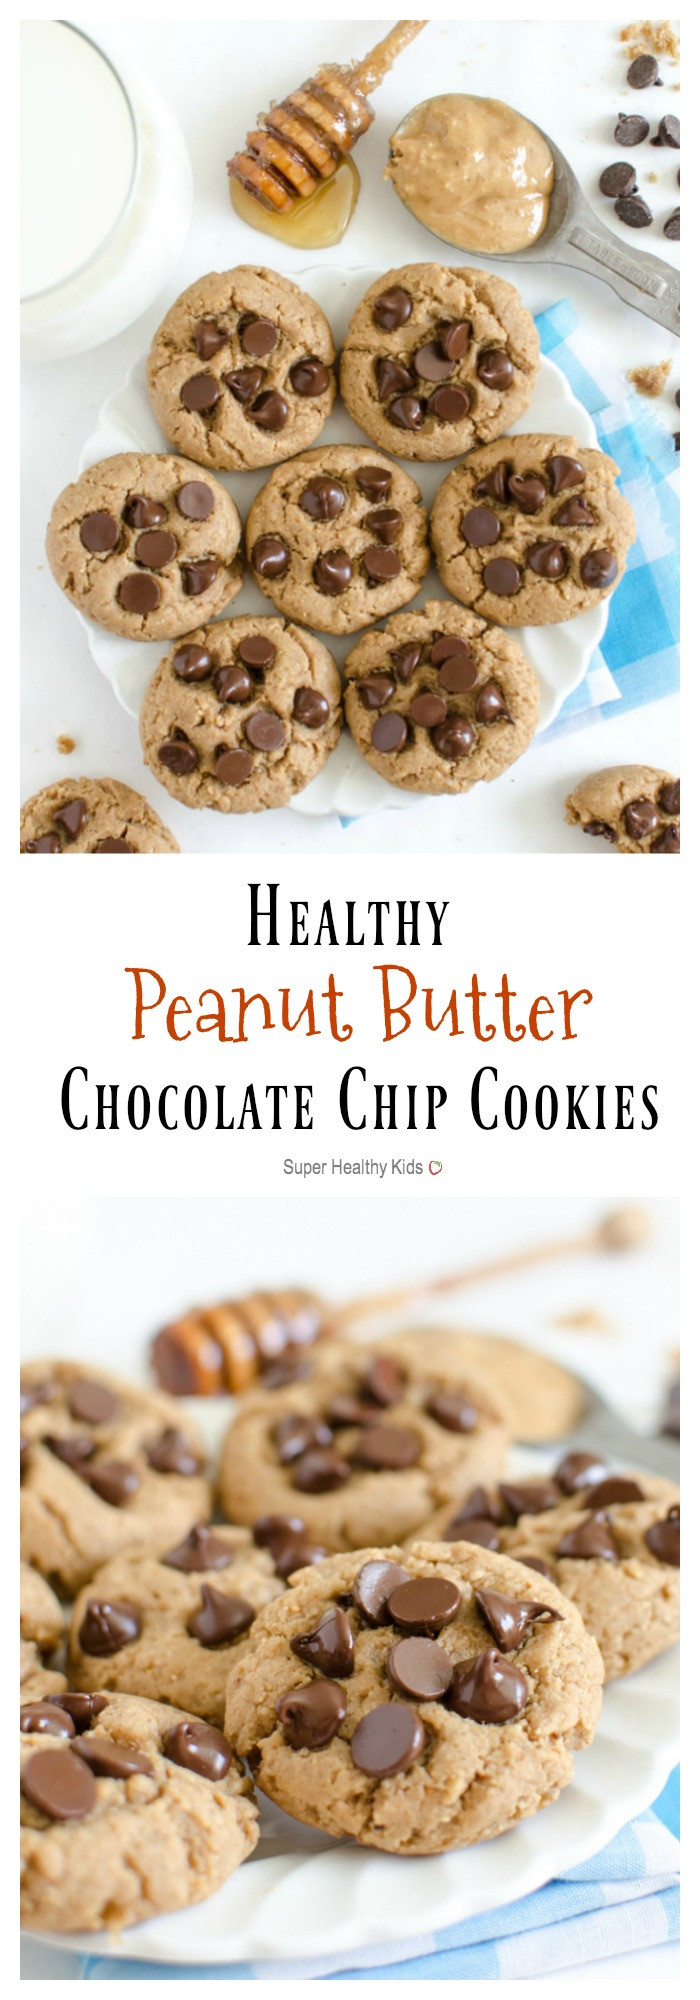 Healthy Peanut Butter Chocolate Chip Cookies
 Peanut Butter Chocolate Chip Cookies